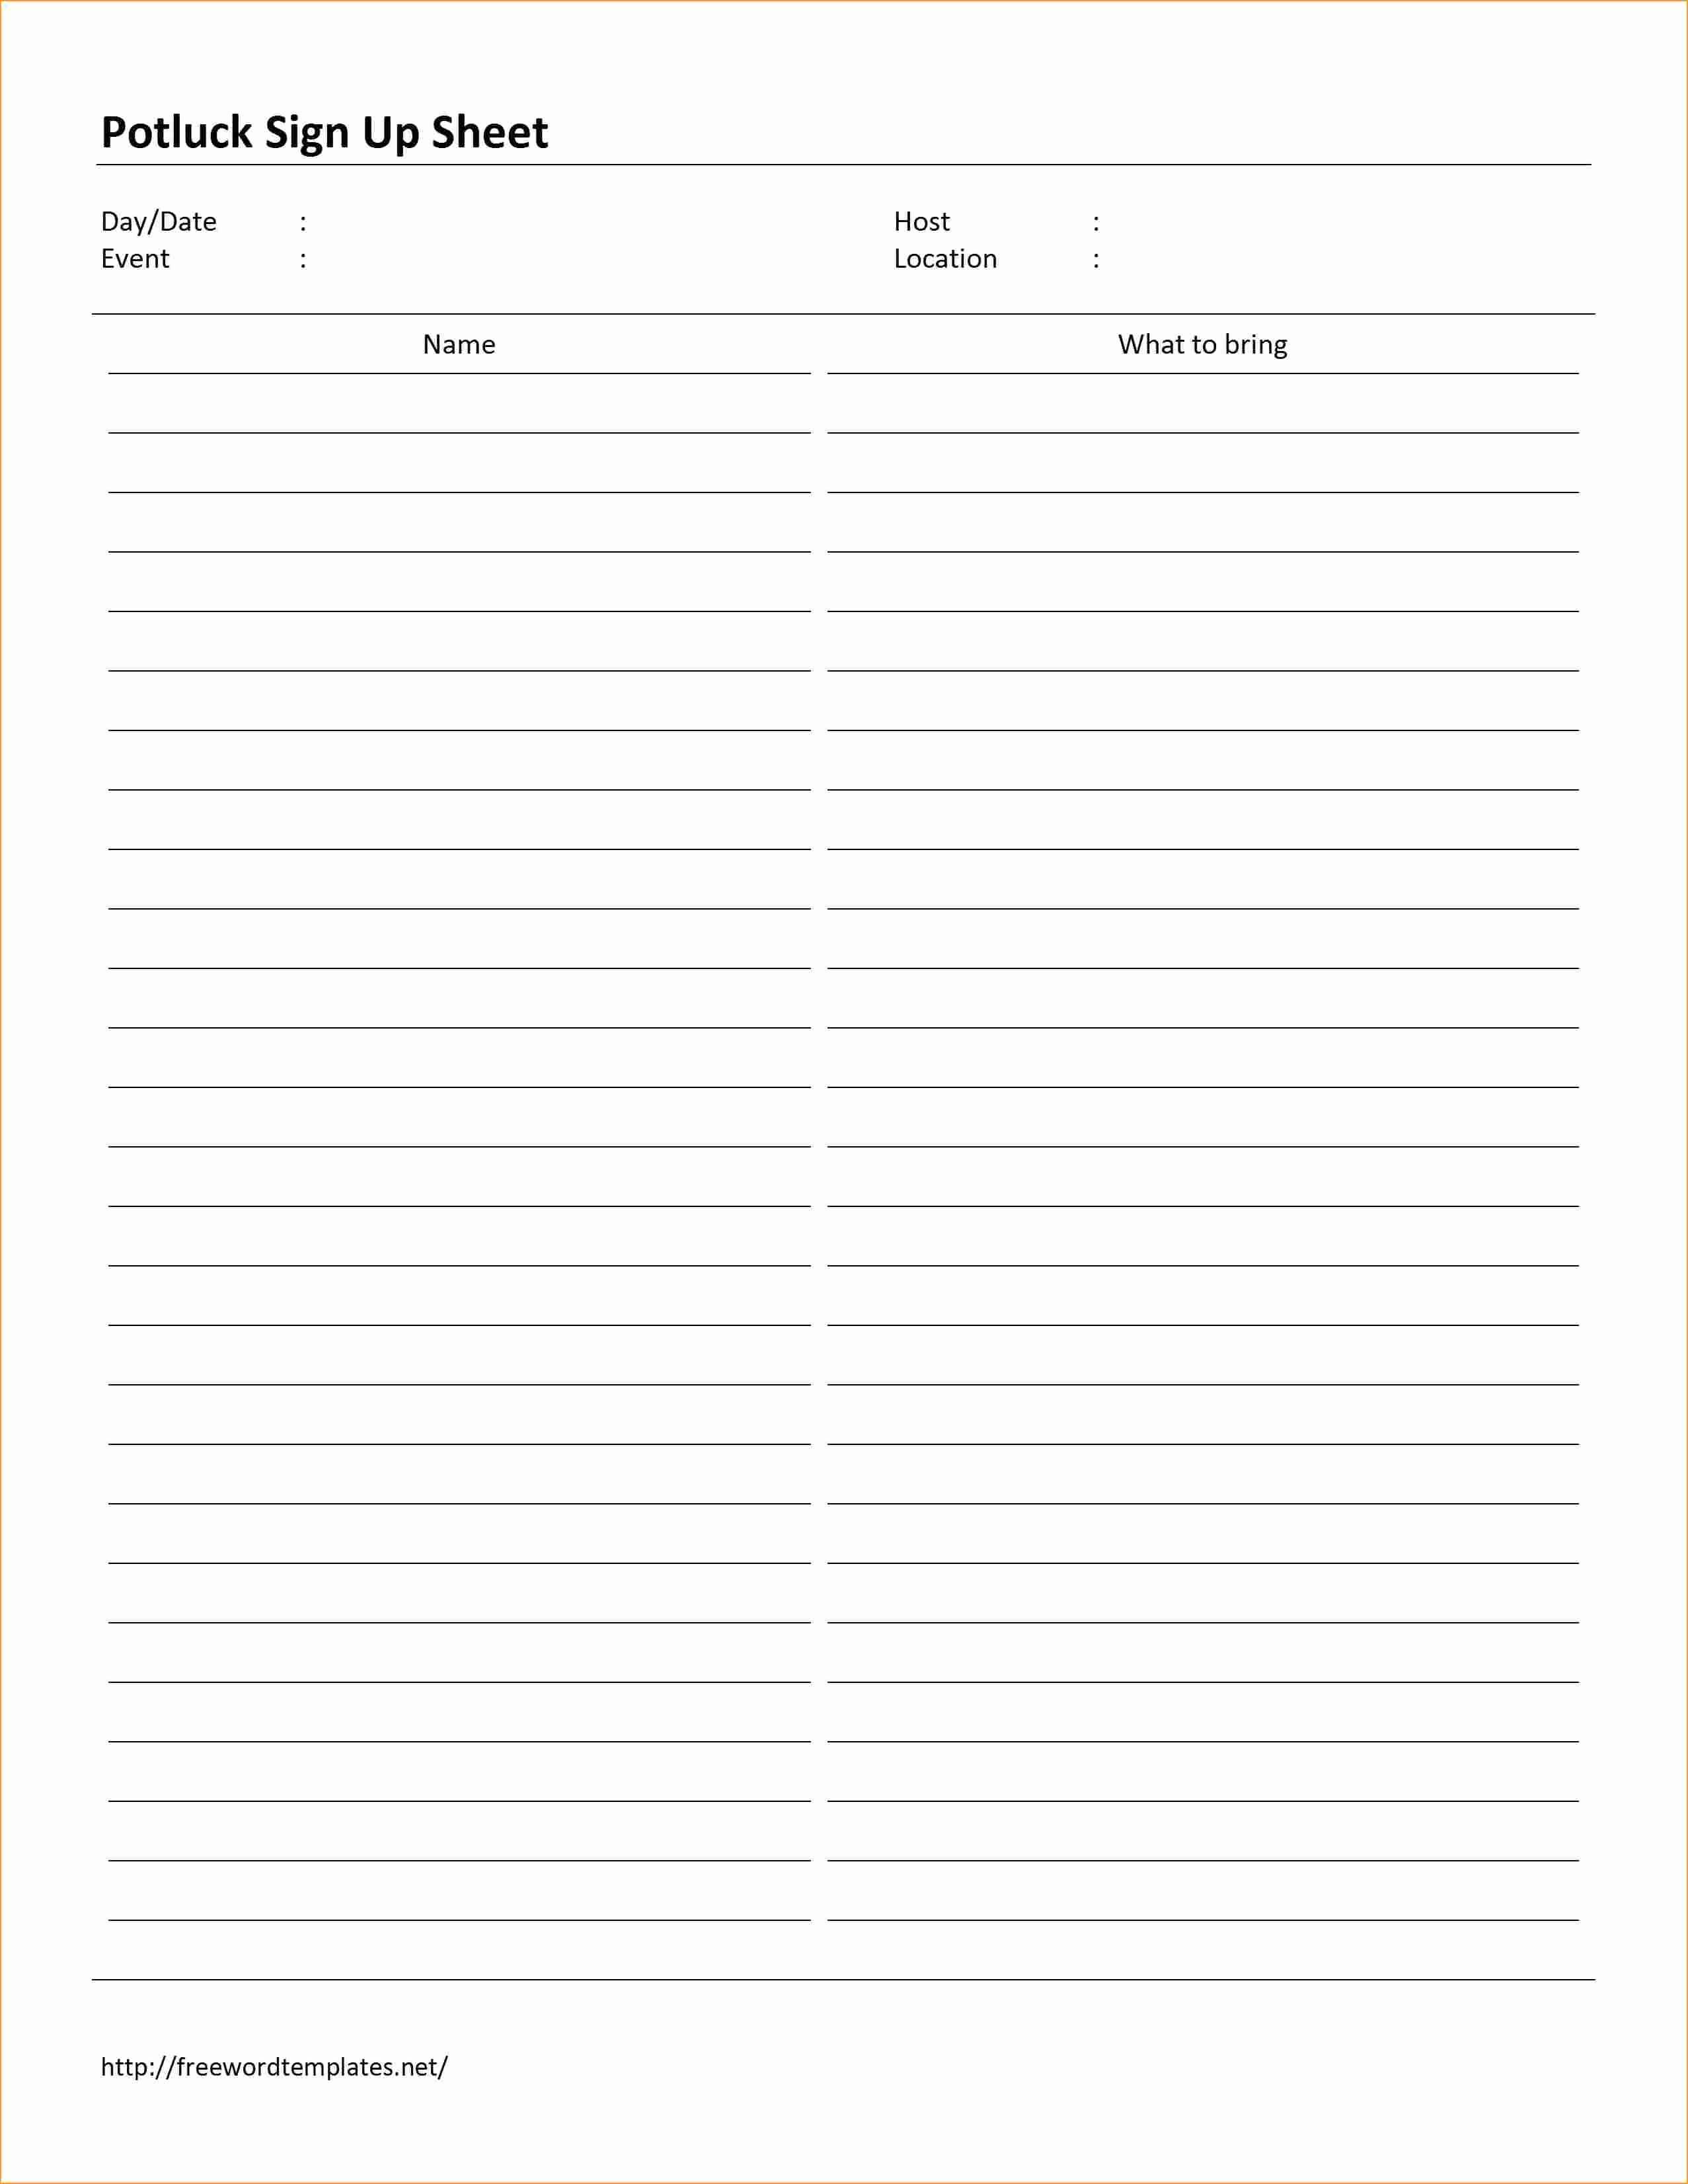 Food Sign Up Sheet Template Lovely Potluck Signup Sheet Template and Potluck Signup Sheet